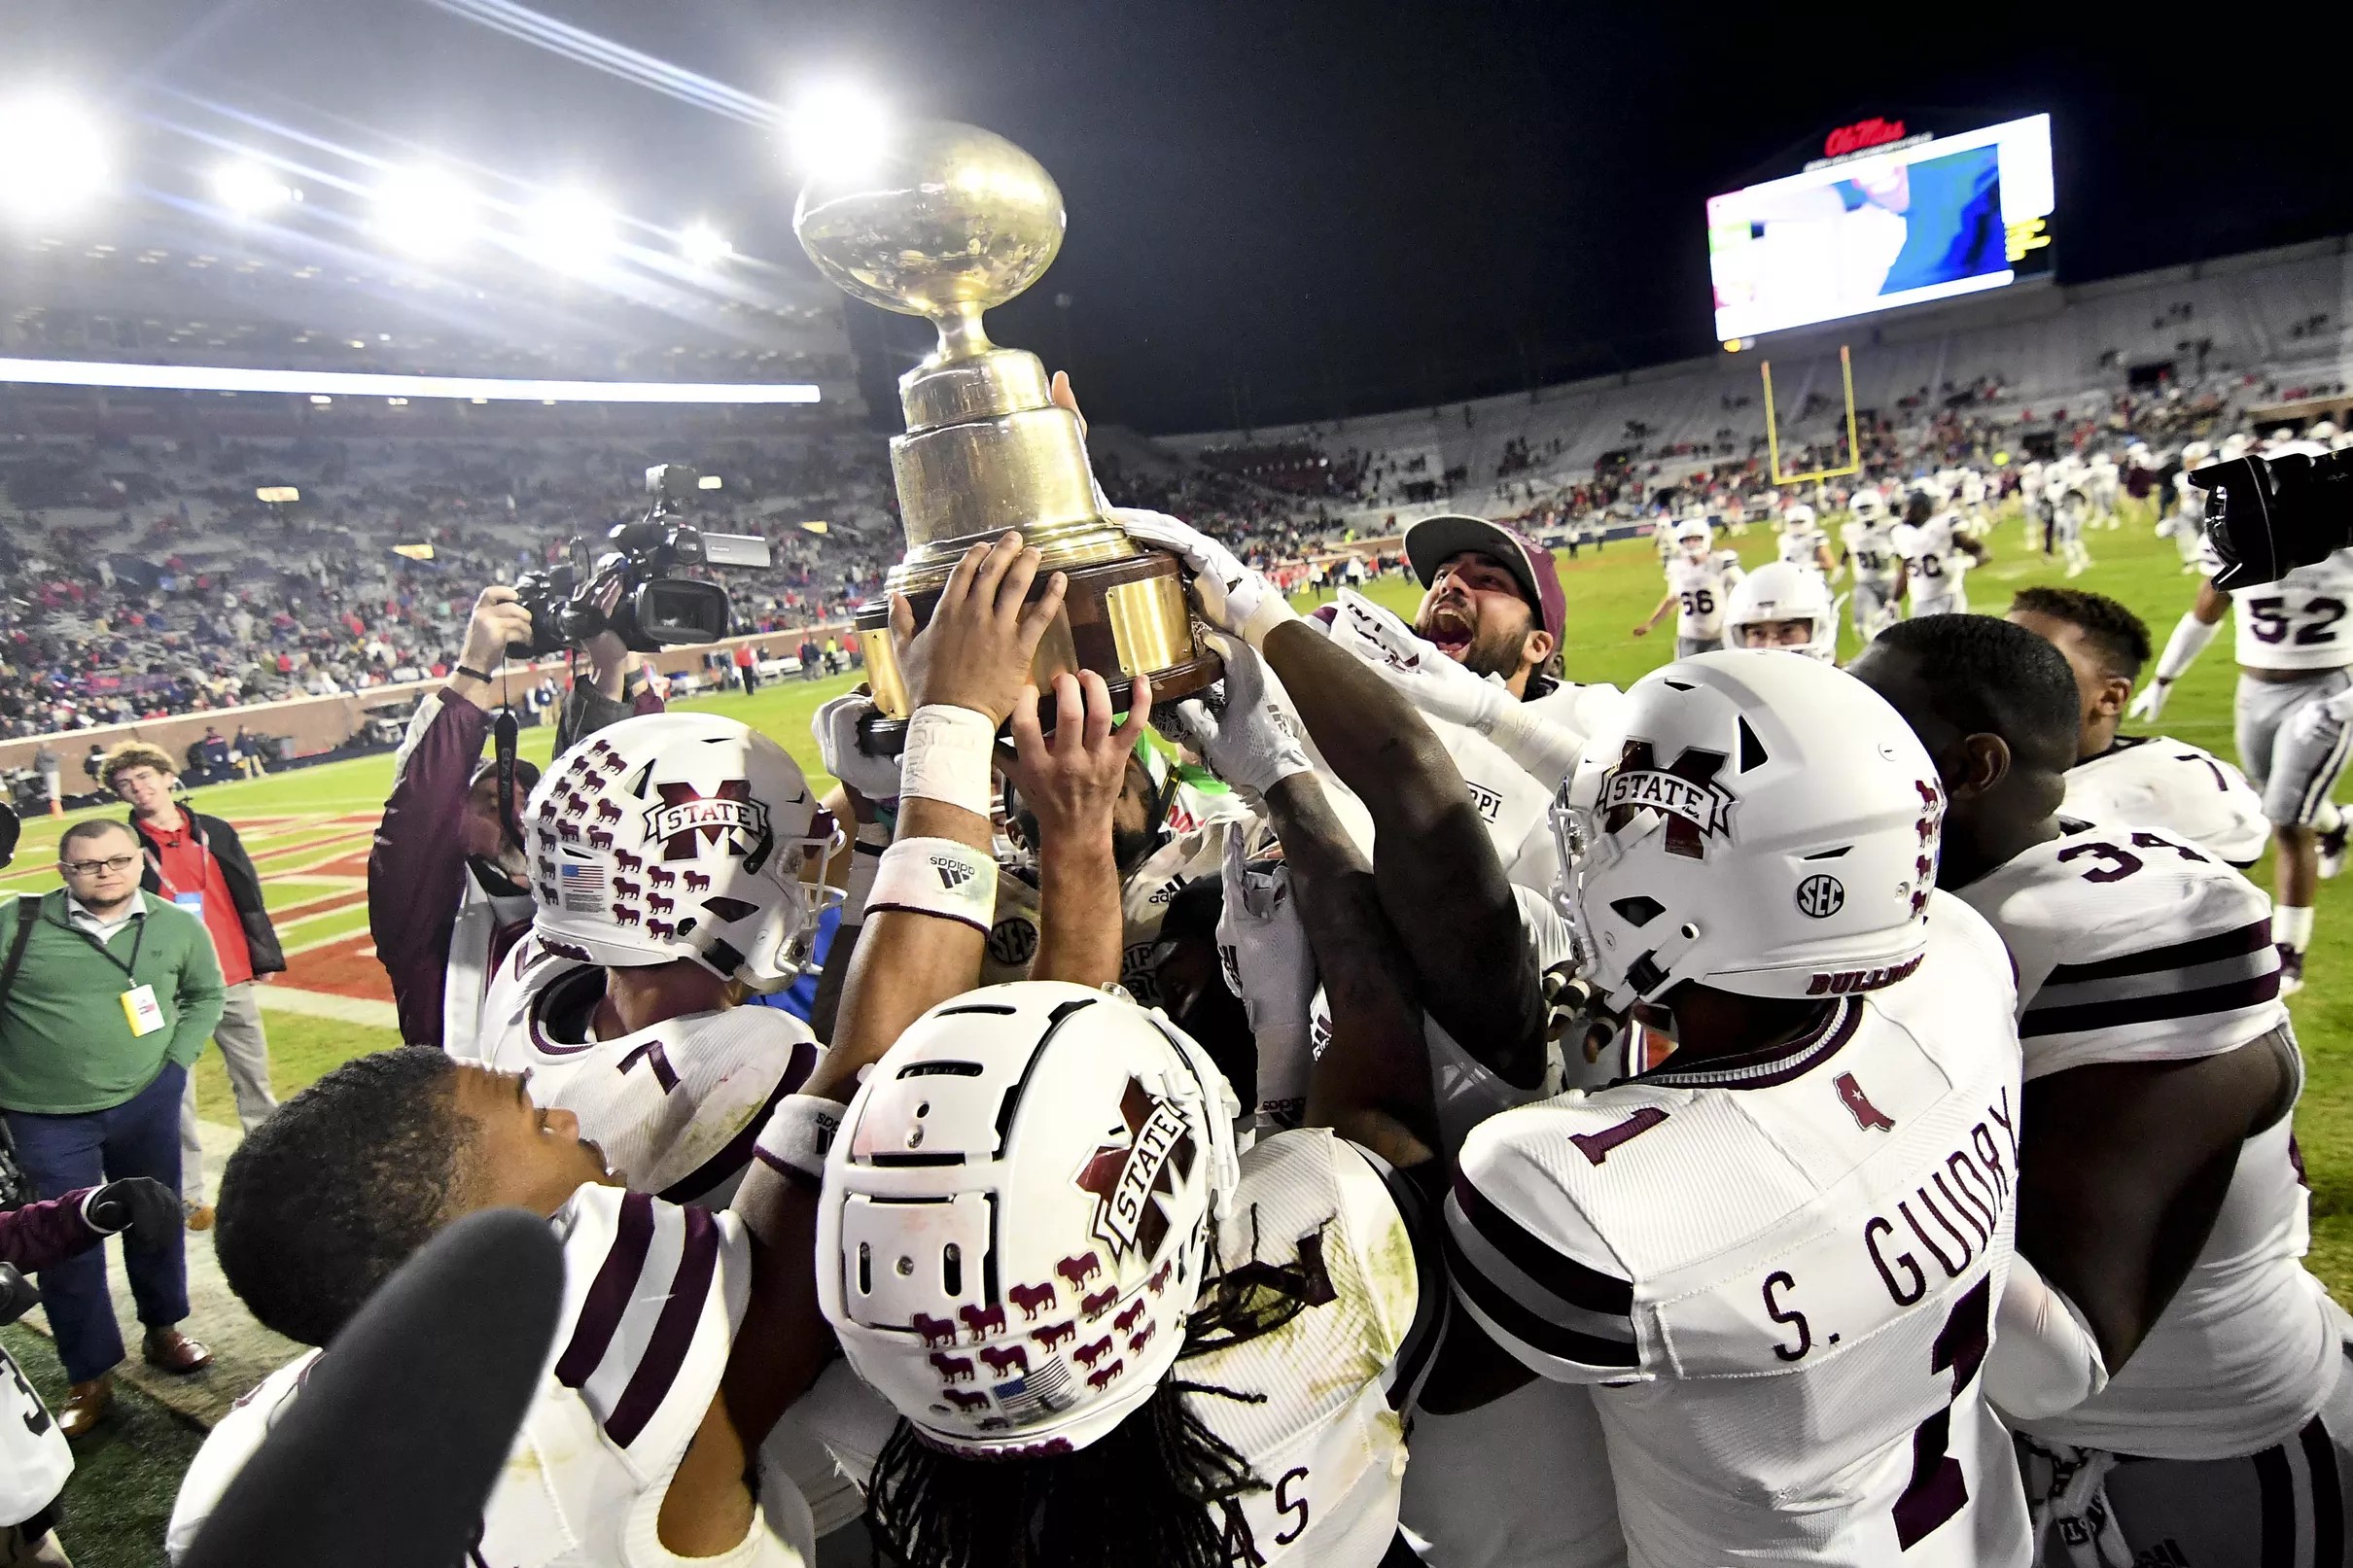 The most irrelevant Egg Bowl is actually quite relevant